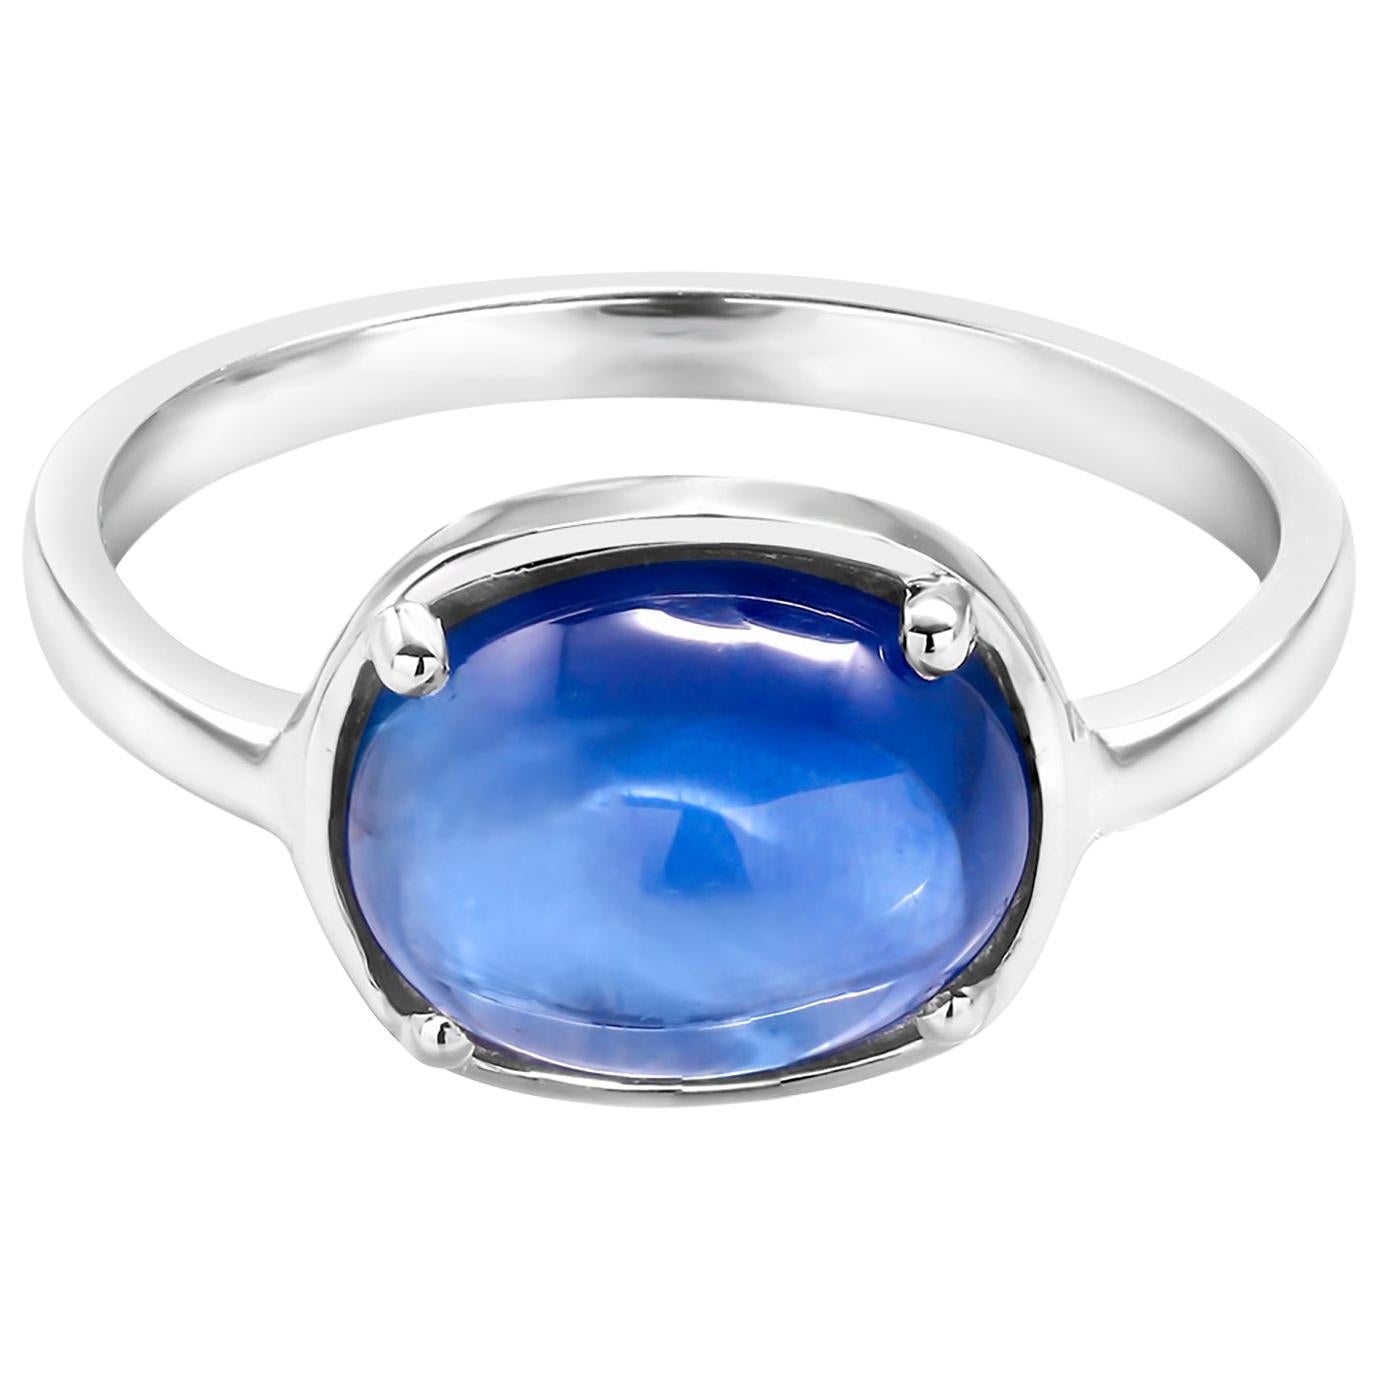 Contemporary Ceylon Cabochon Sapphire Weighing 4.25 Carat White Gold Cocktail Ring